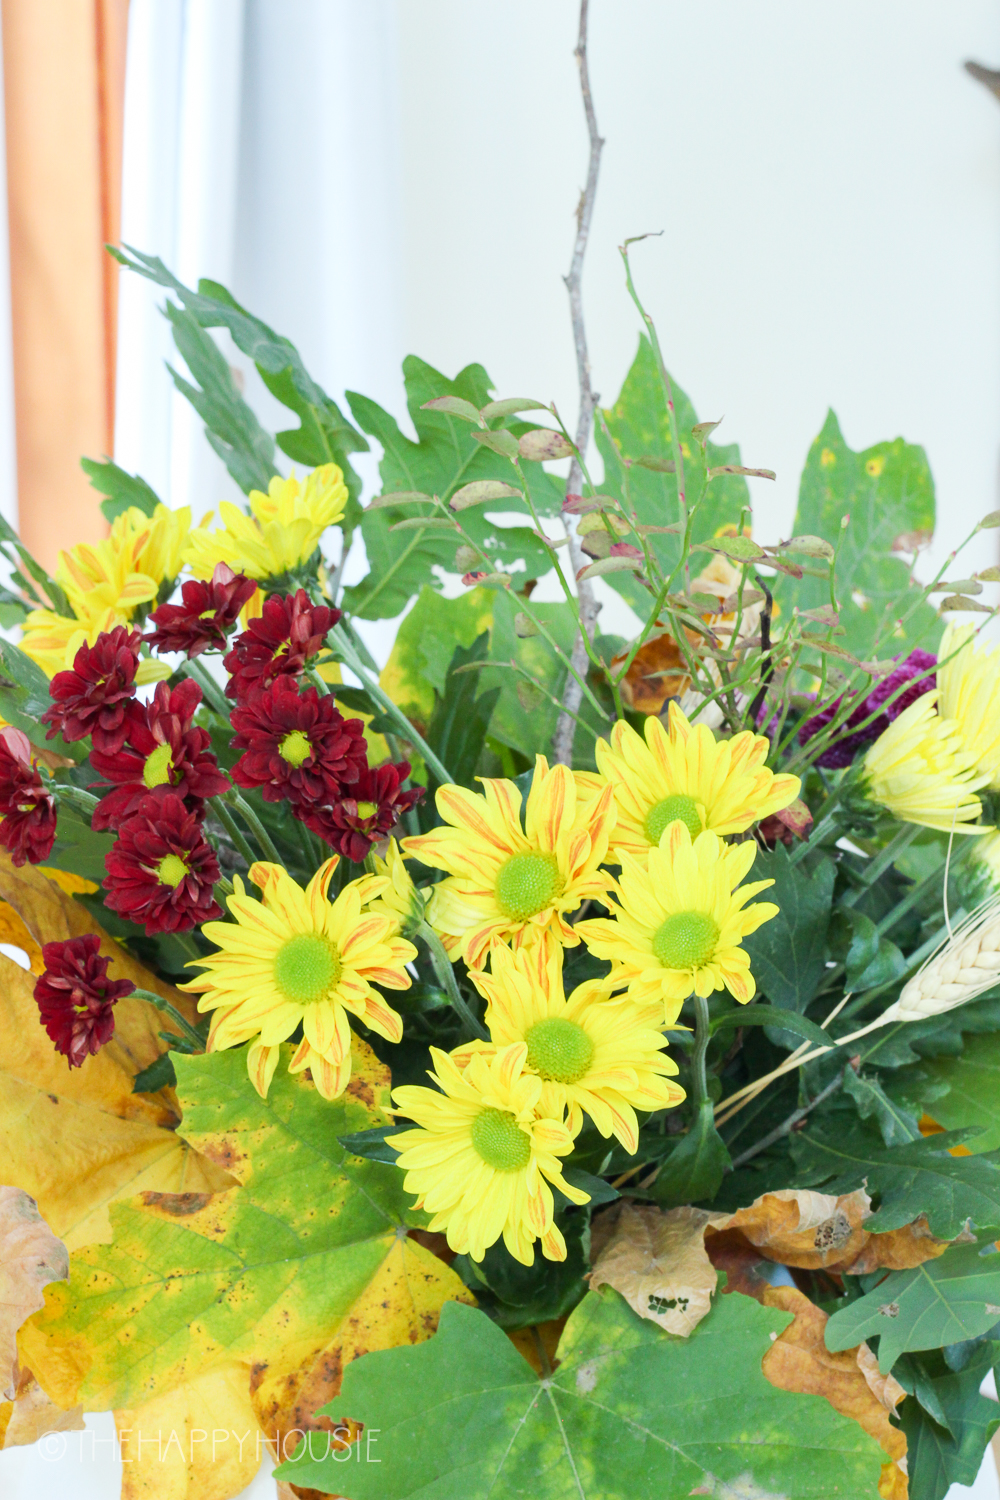 Yellow and red flowers with leaves in a vase.